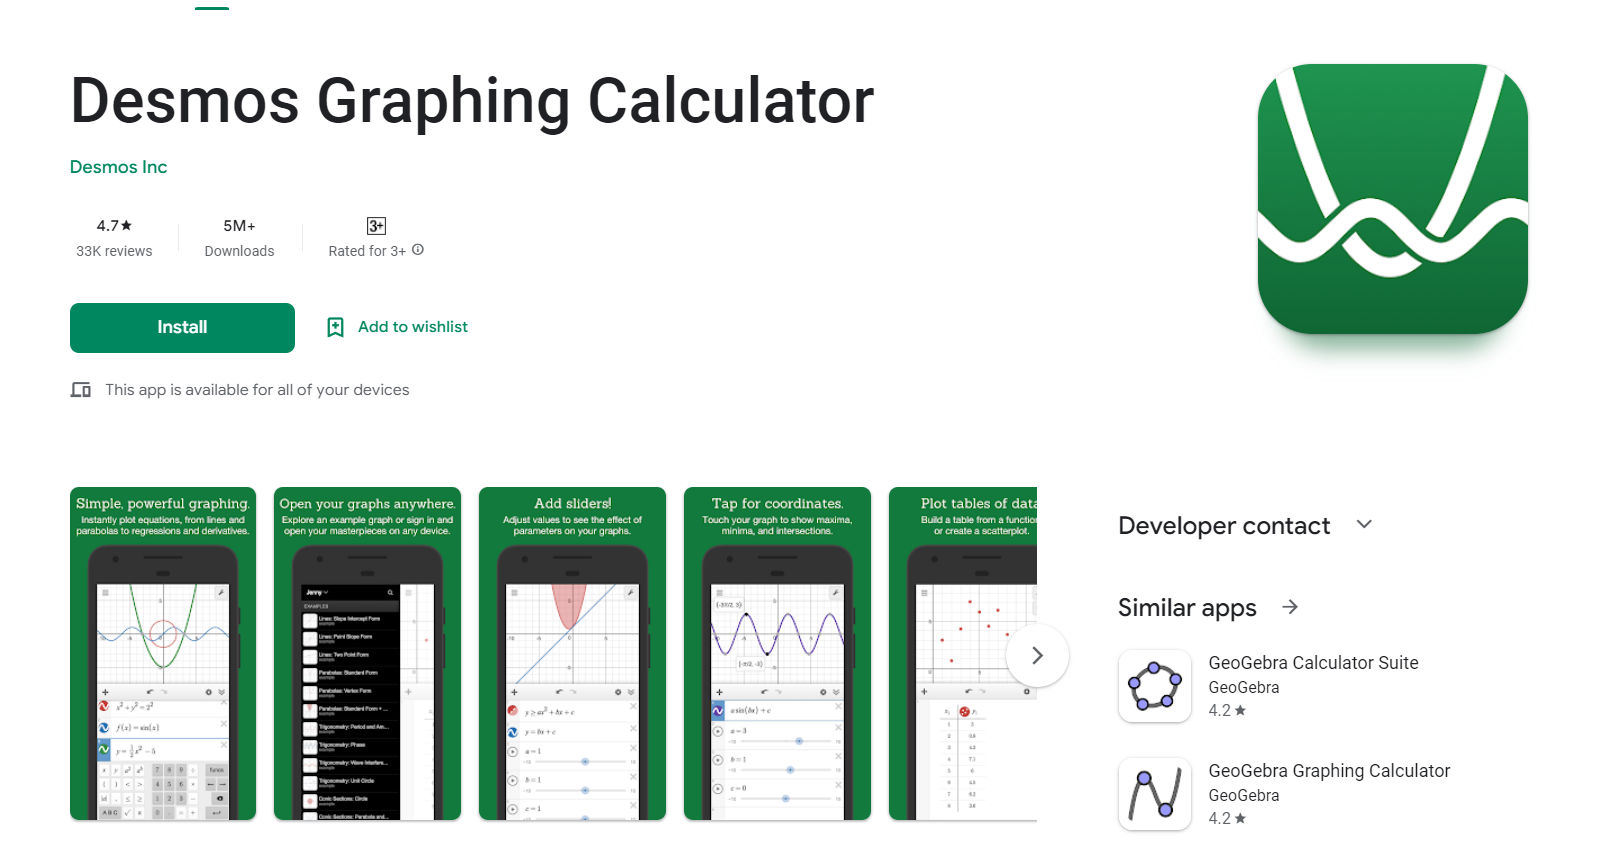 Desmos graphing calculator apps and website  